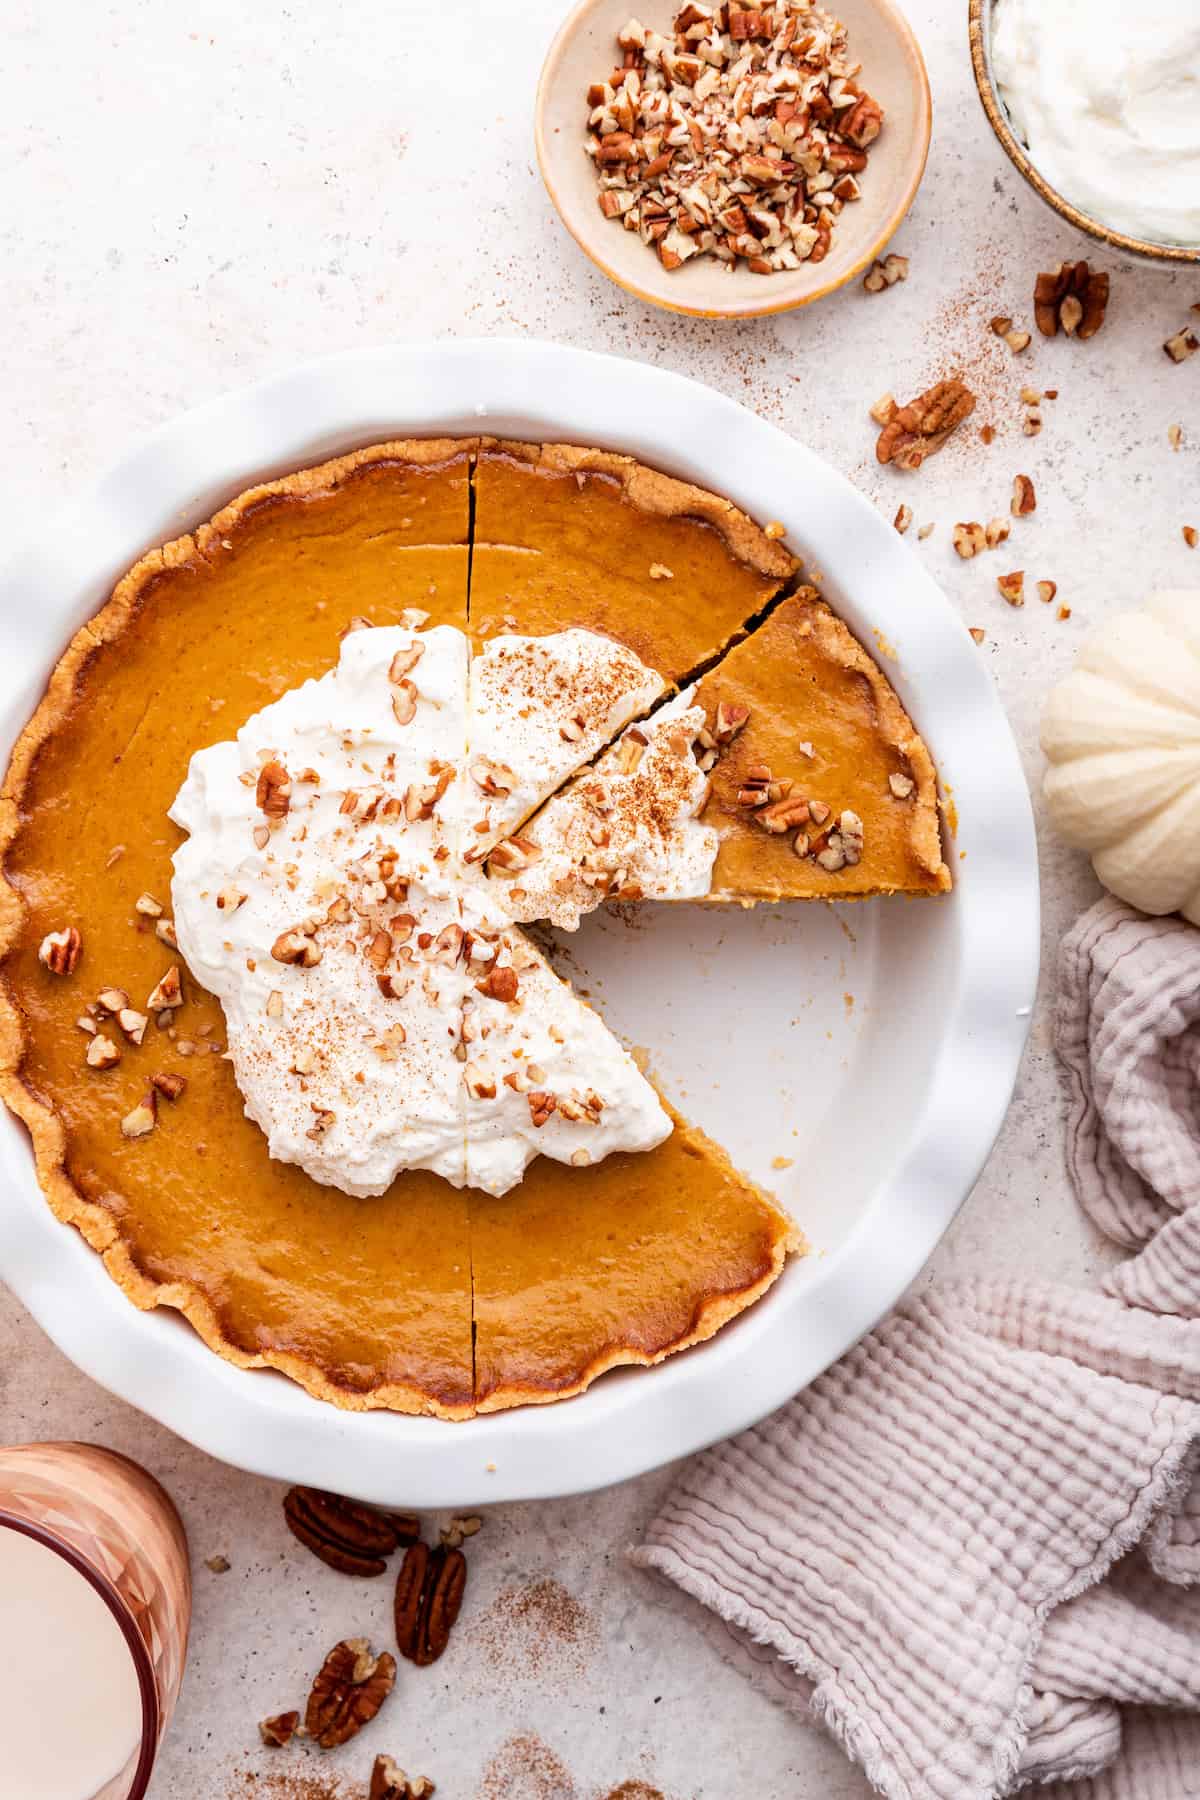 Overhead view of sliced gluten-free pumpkin pie with one piece removed